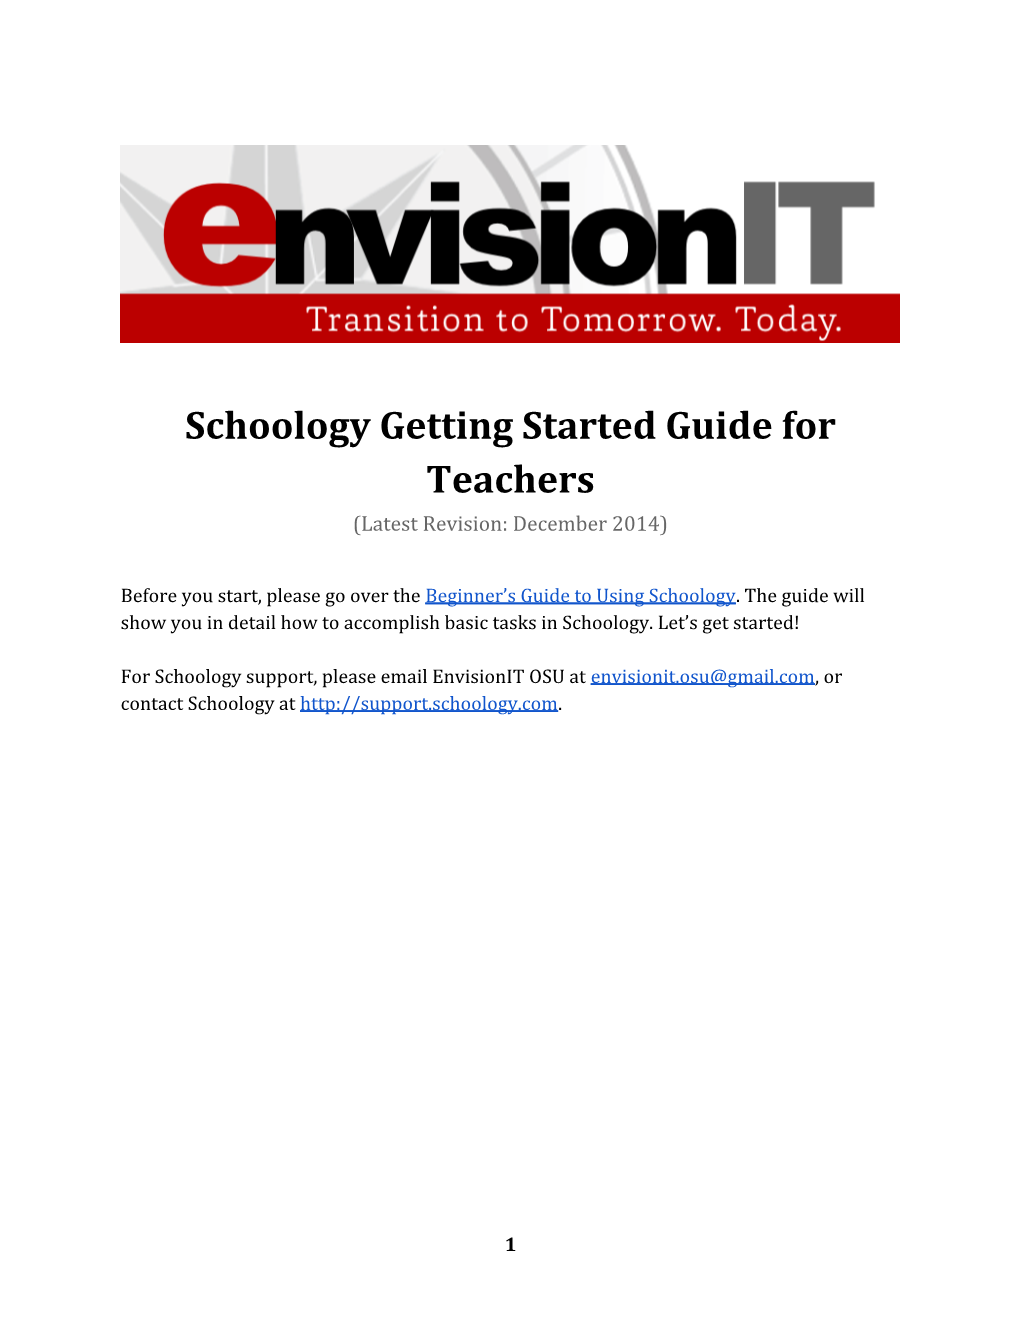 Schoology Getting Started Guide for Teachers (Latest Revision: December 2014)